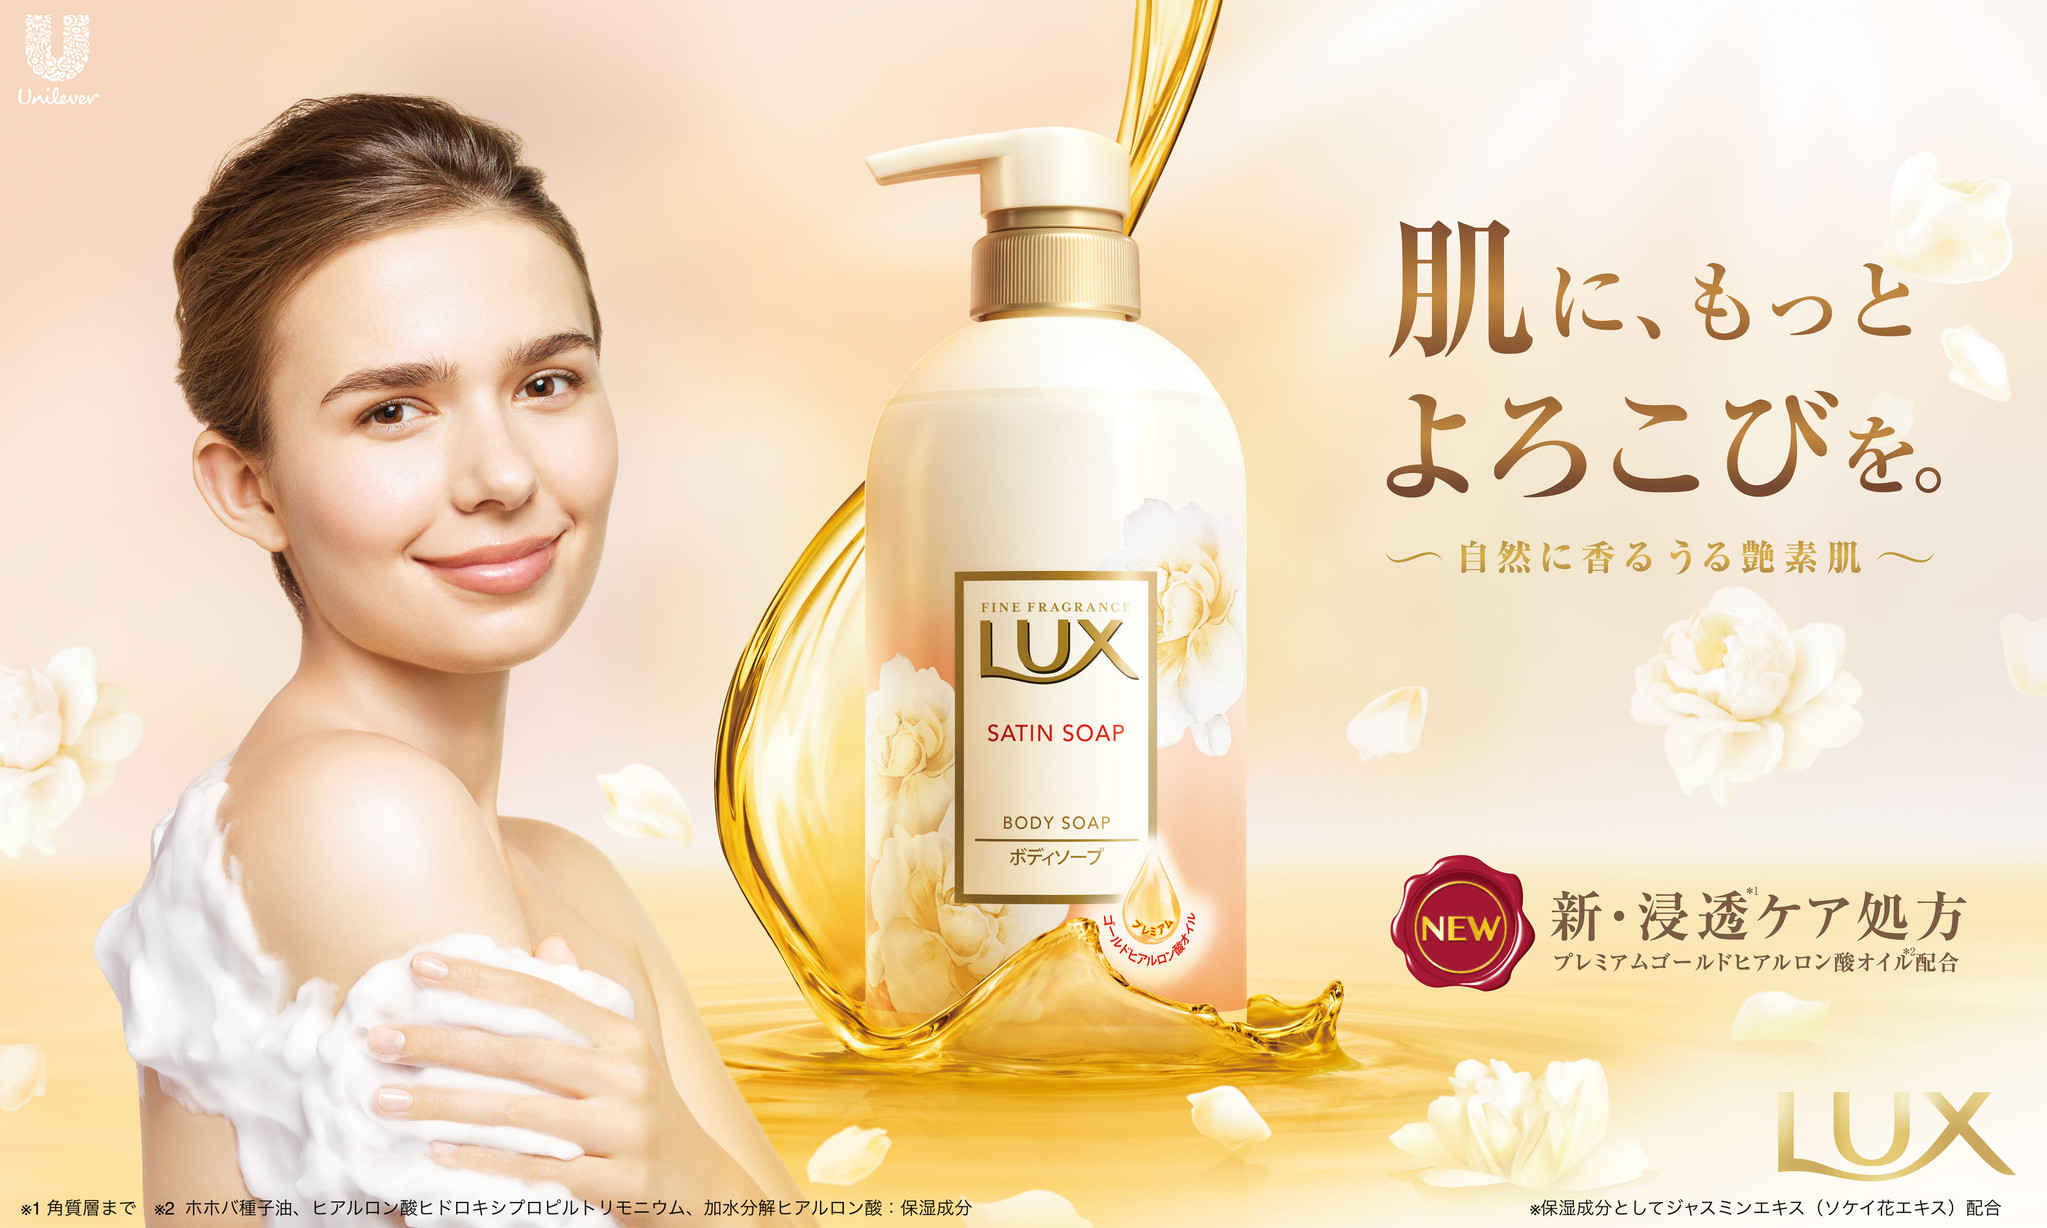 LUX ラックス ボディソープ clinicacampinas.com.br